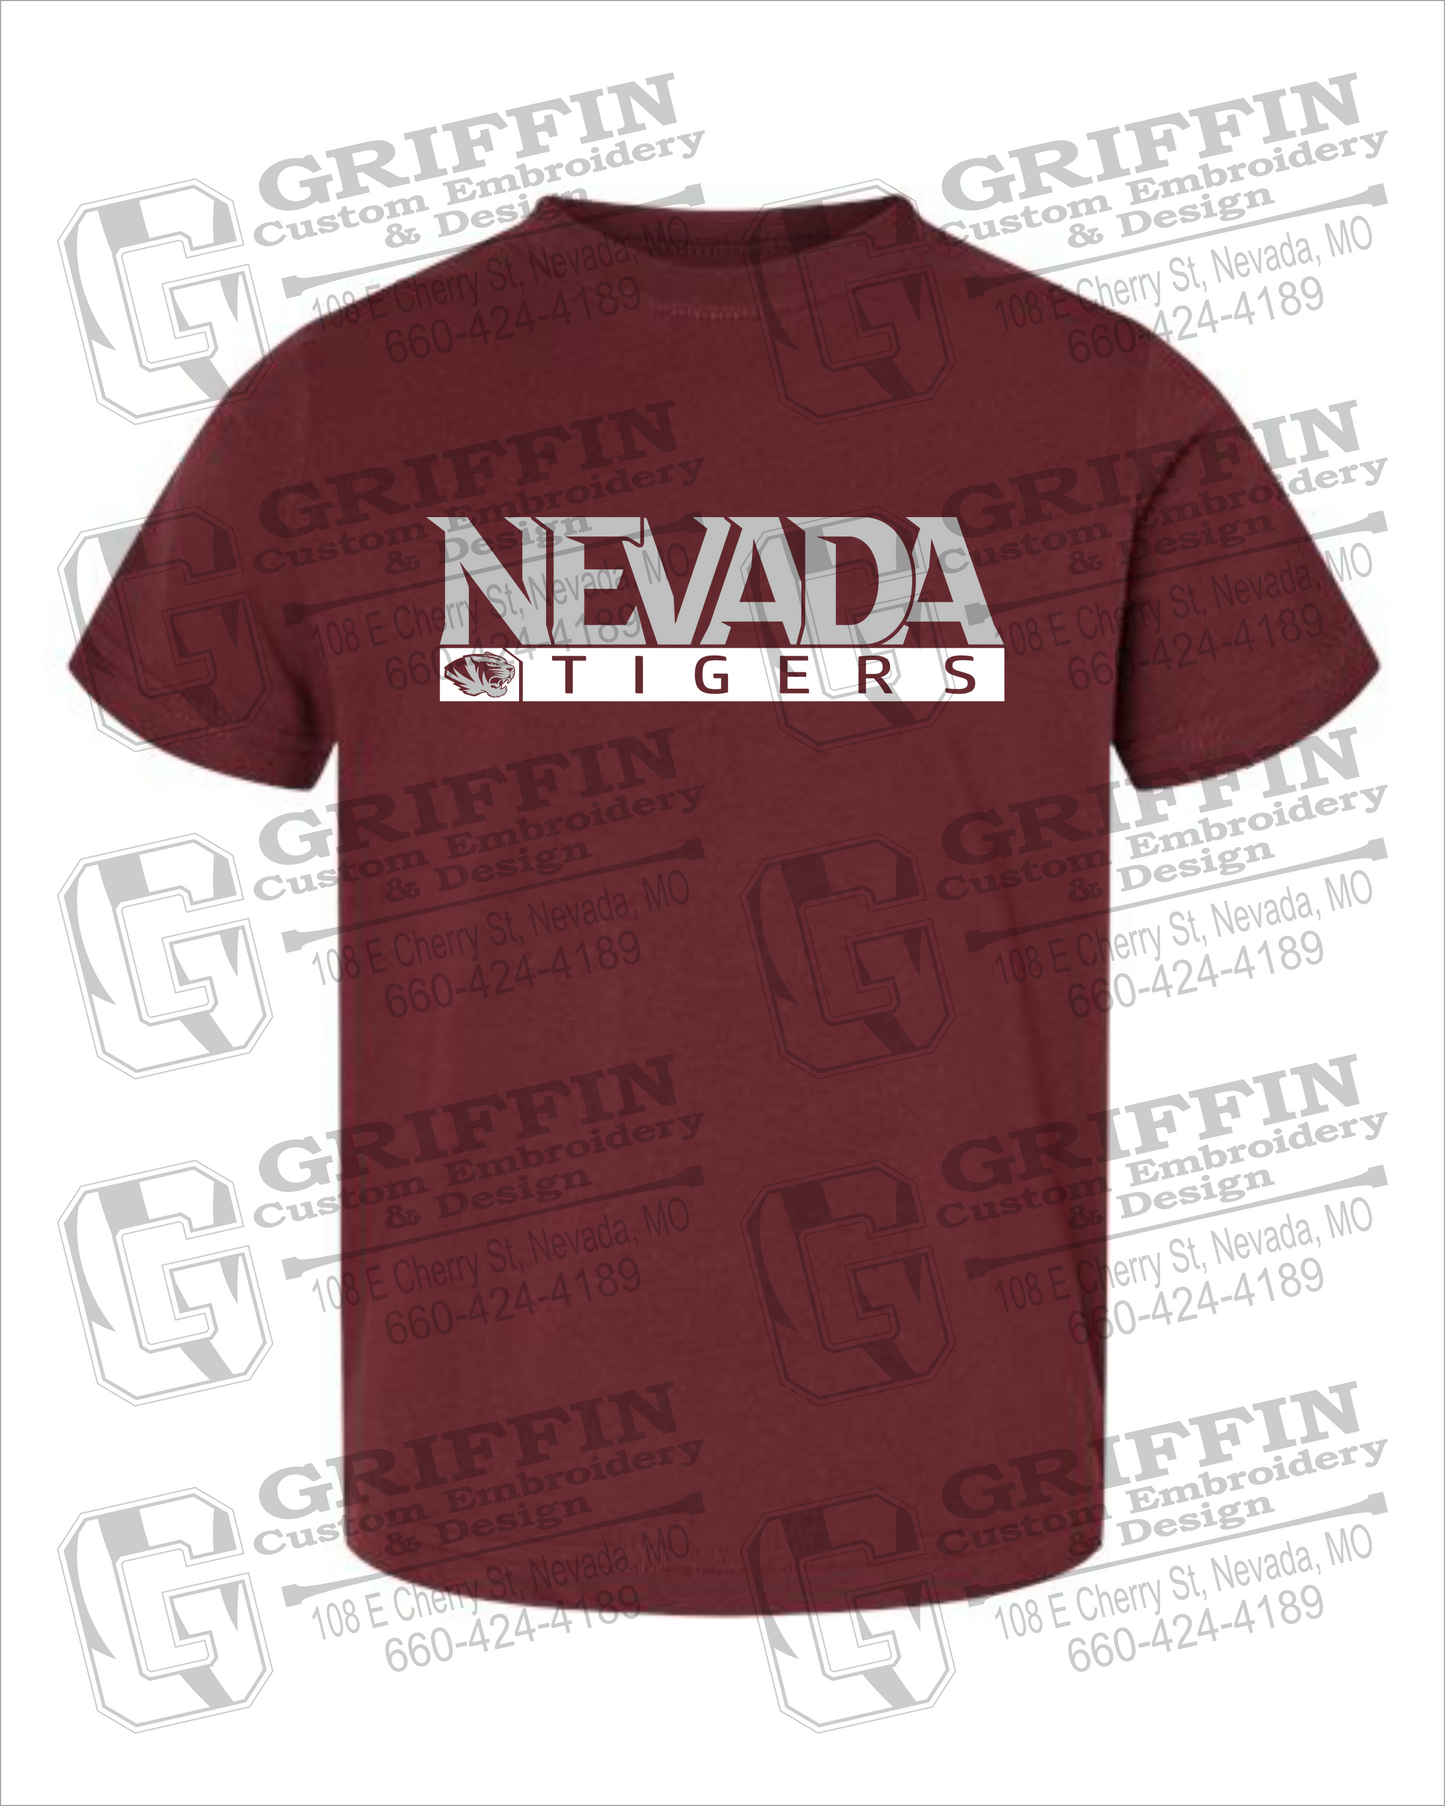 Nevada Tigers 22-G Toddler/Infant T-Shirt